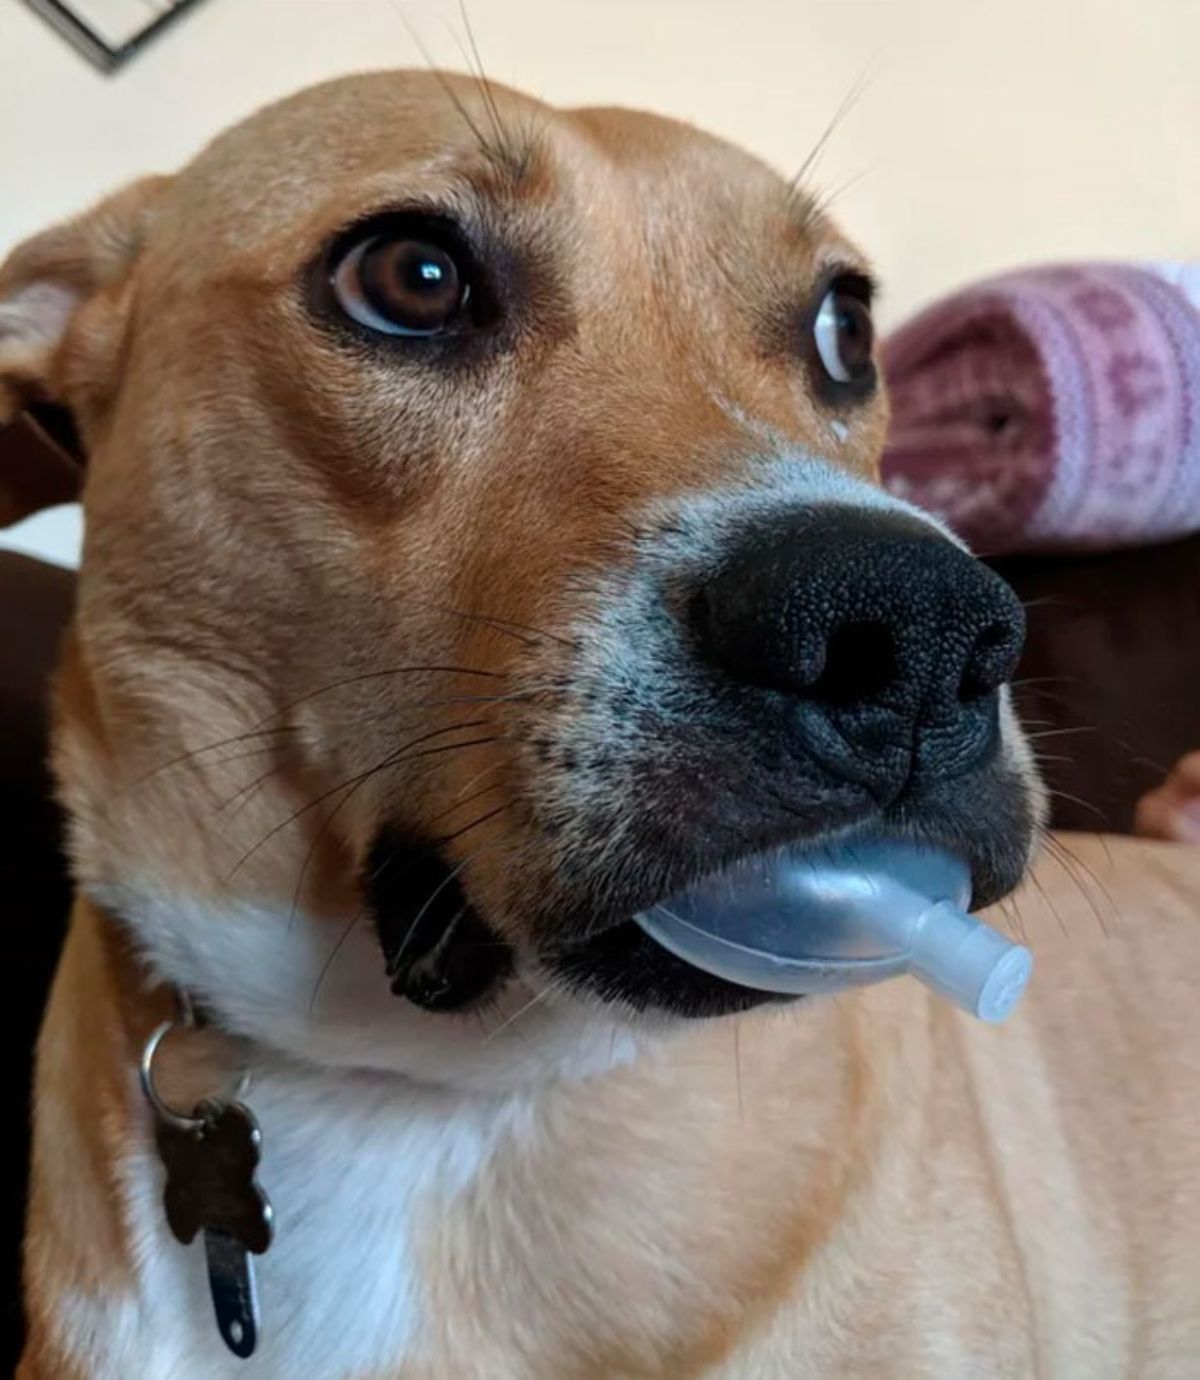 brown and white dog holding a transparent plastic squeaker from a toy in its mouth